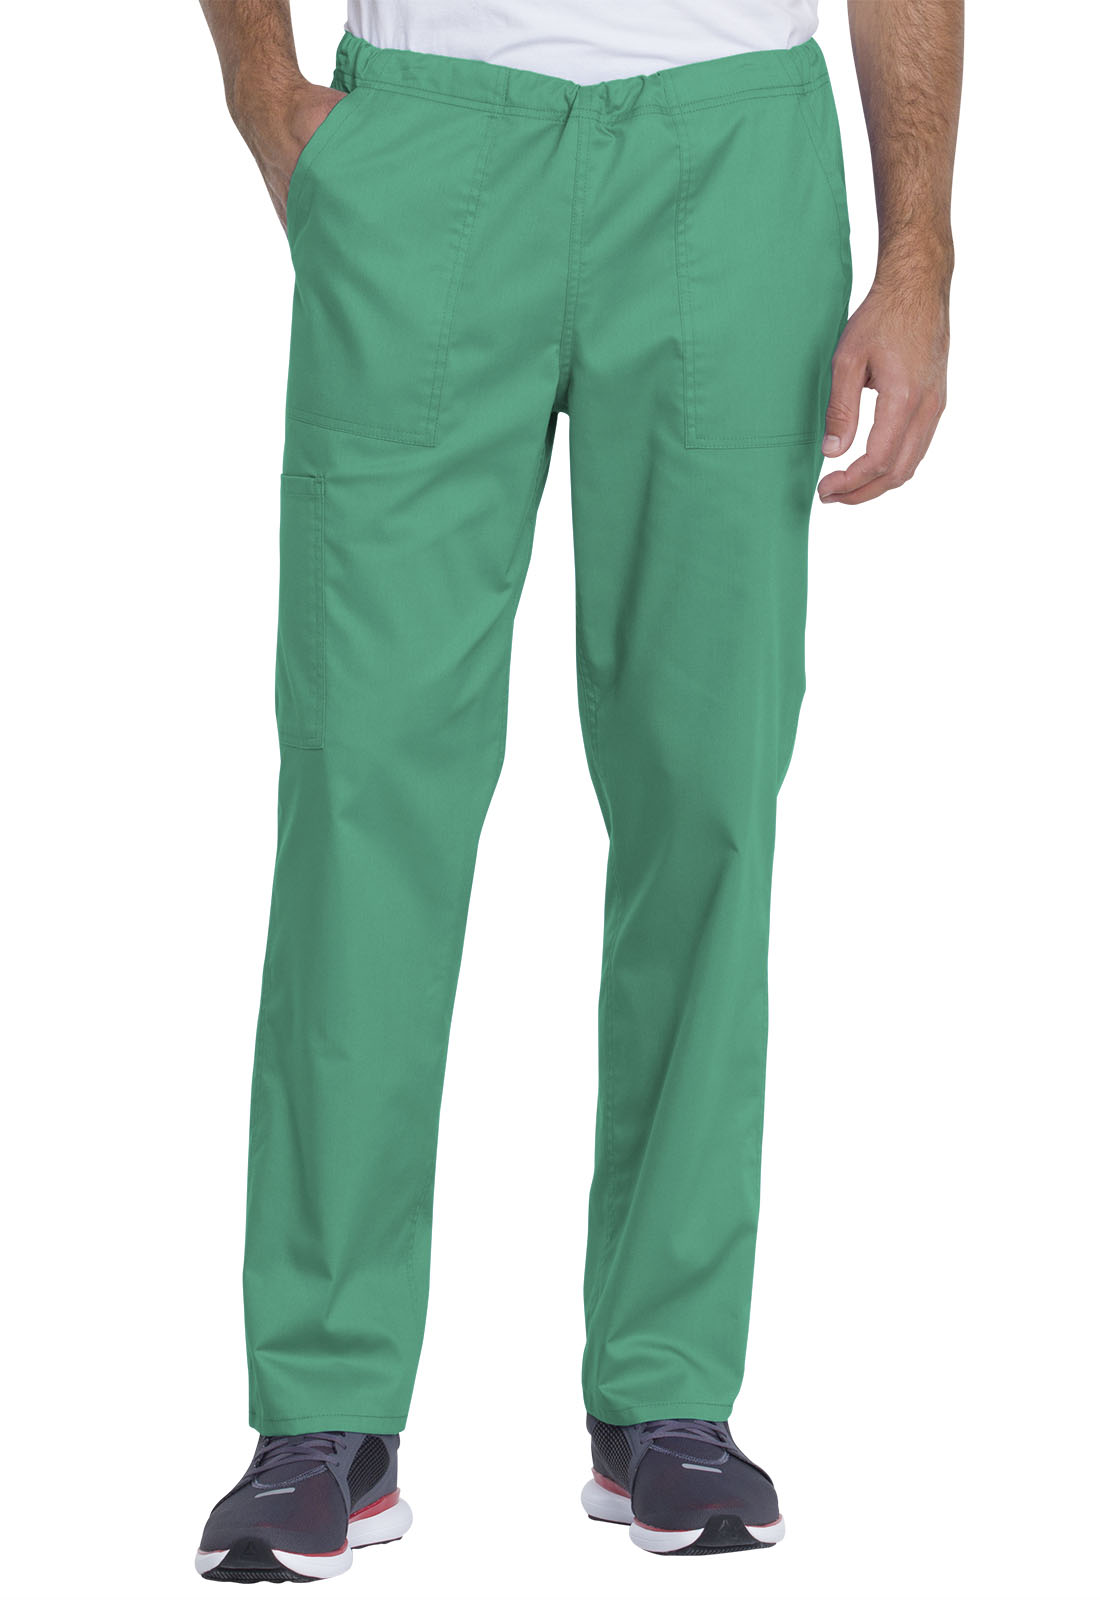 Surgical Green